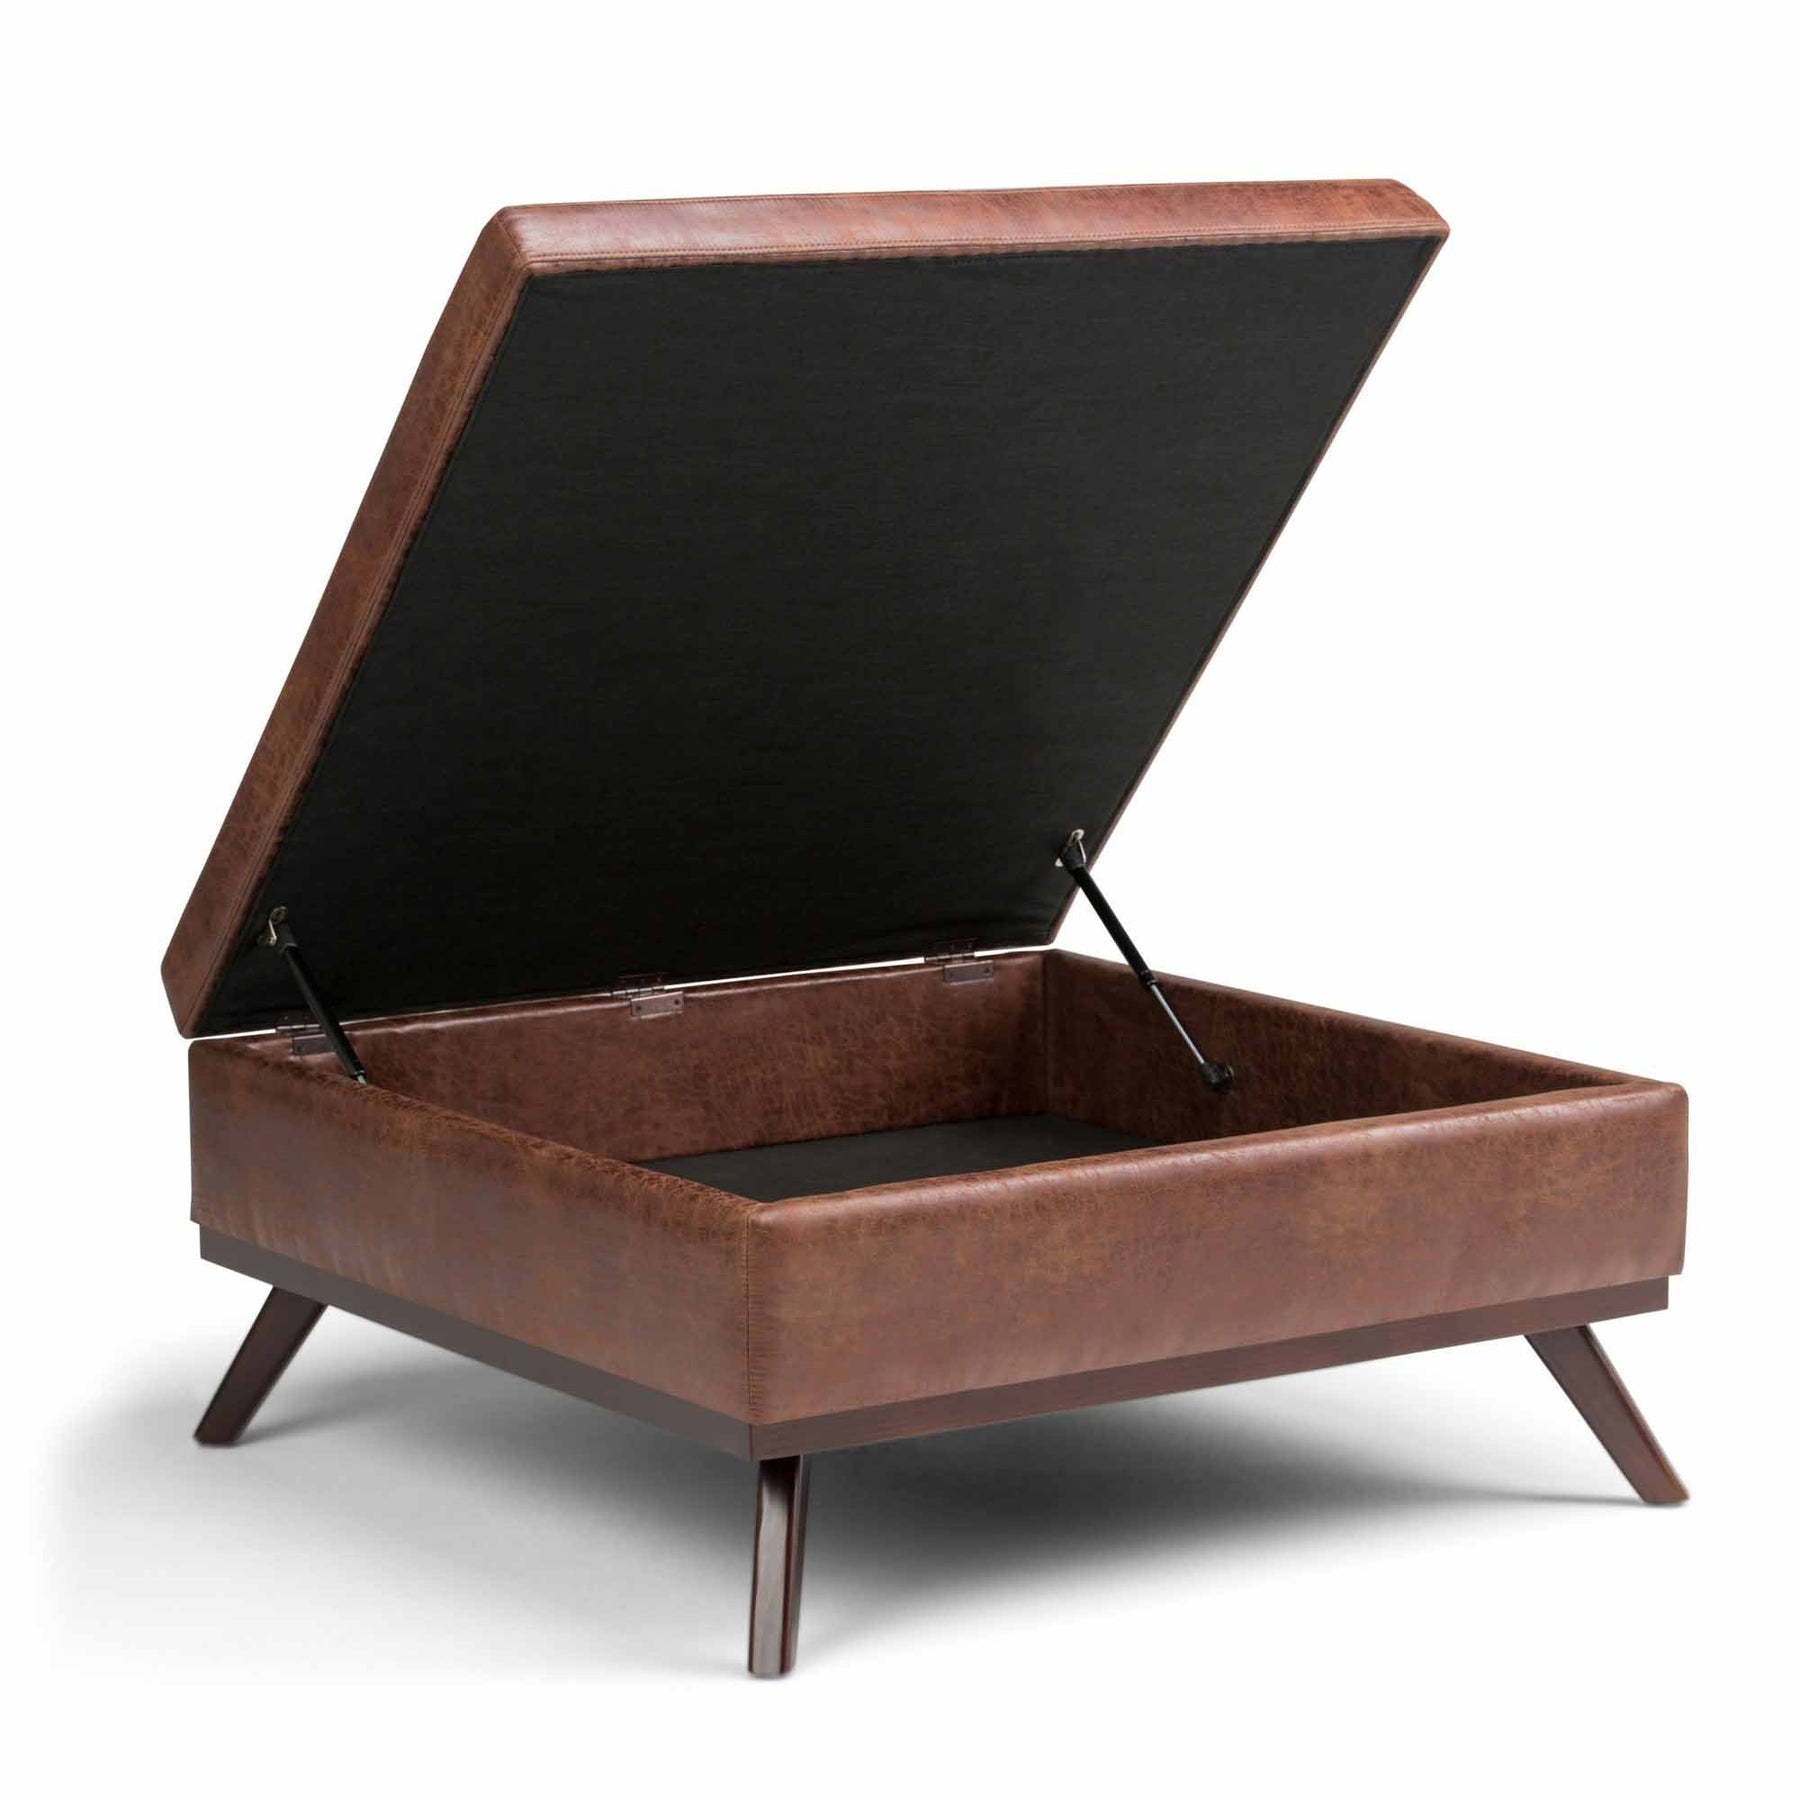 Distressed Saddle Brown Distressed Vegan Leather | Owen Coffee Table Ottoman with Storage